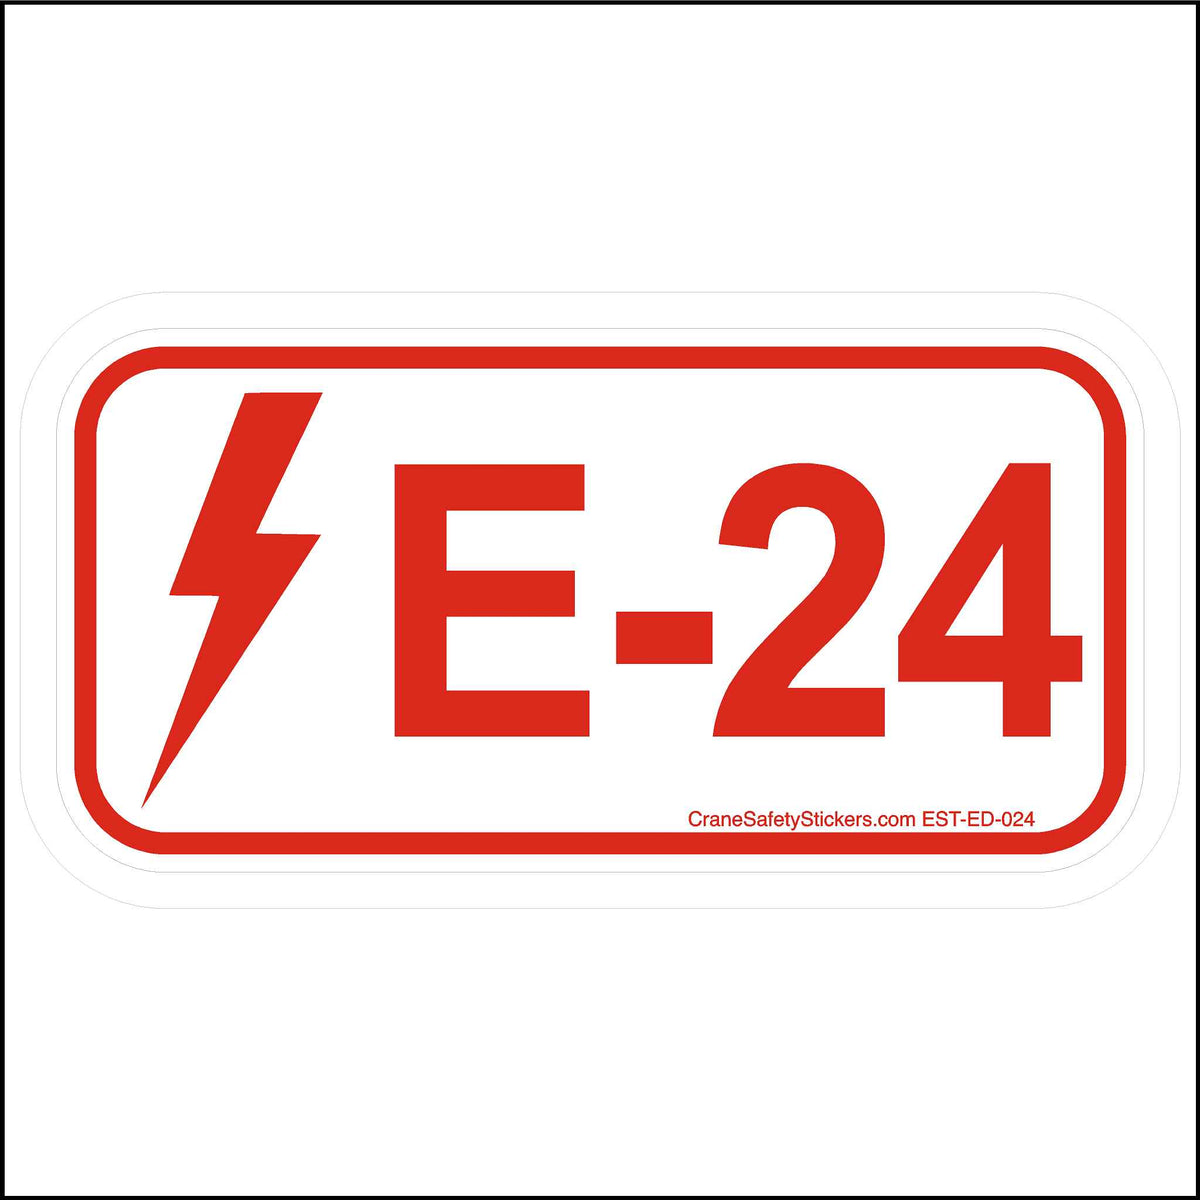 Energy Control Program Electrical Disconnect Stickers E-24.